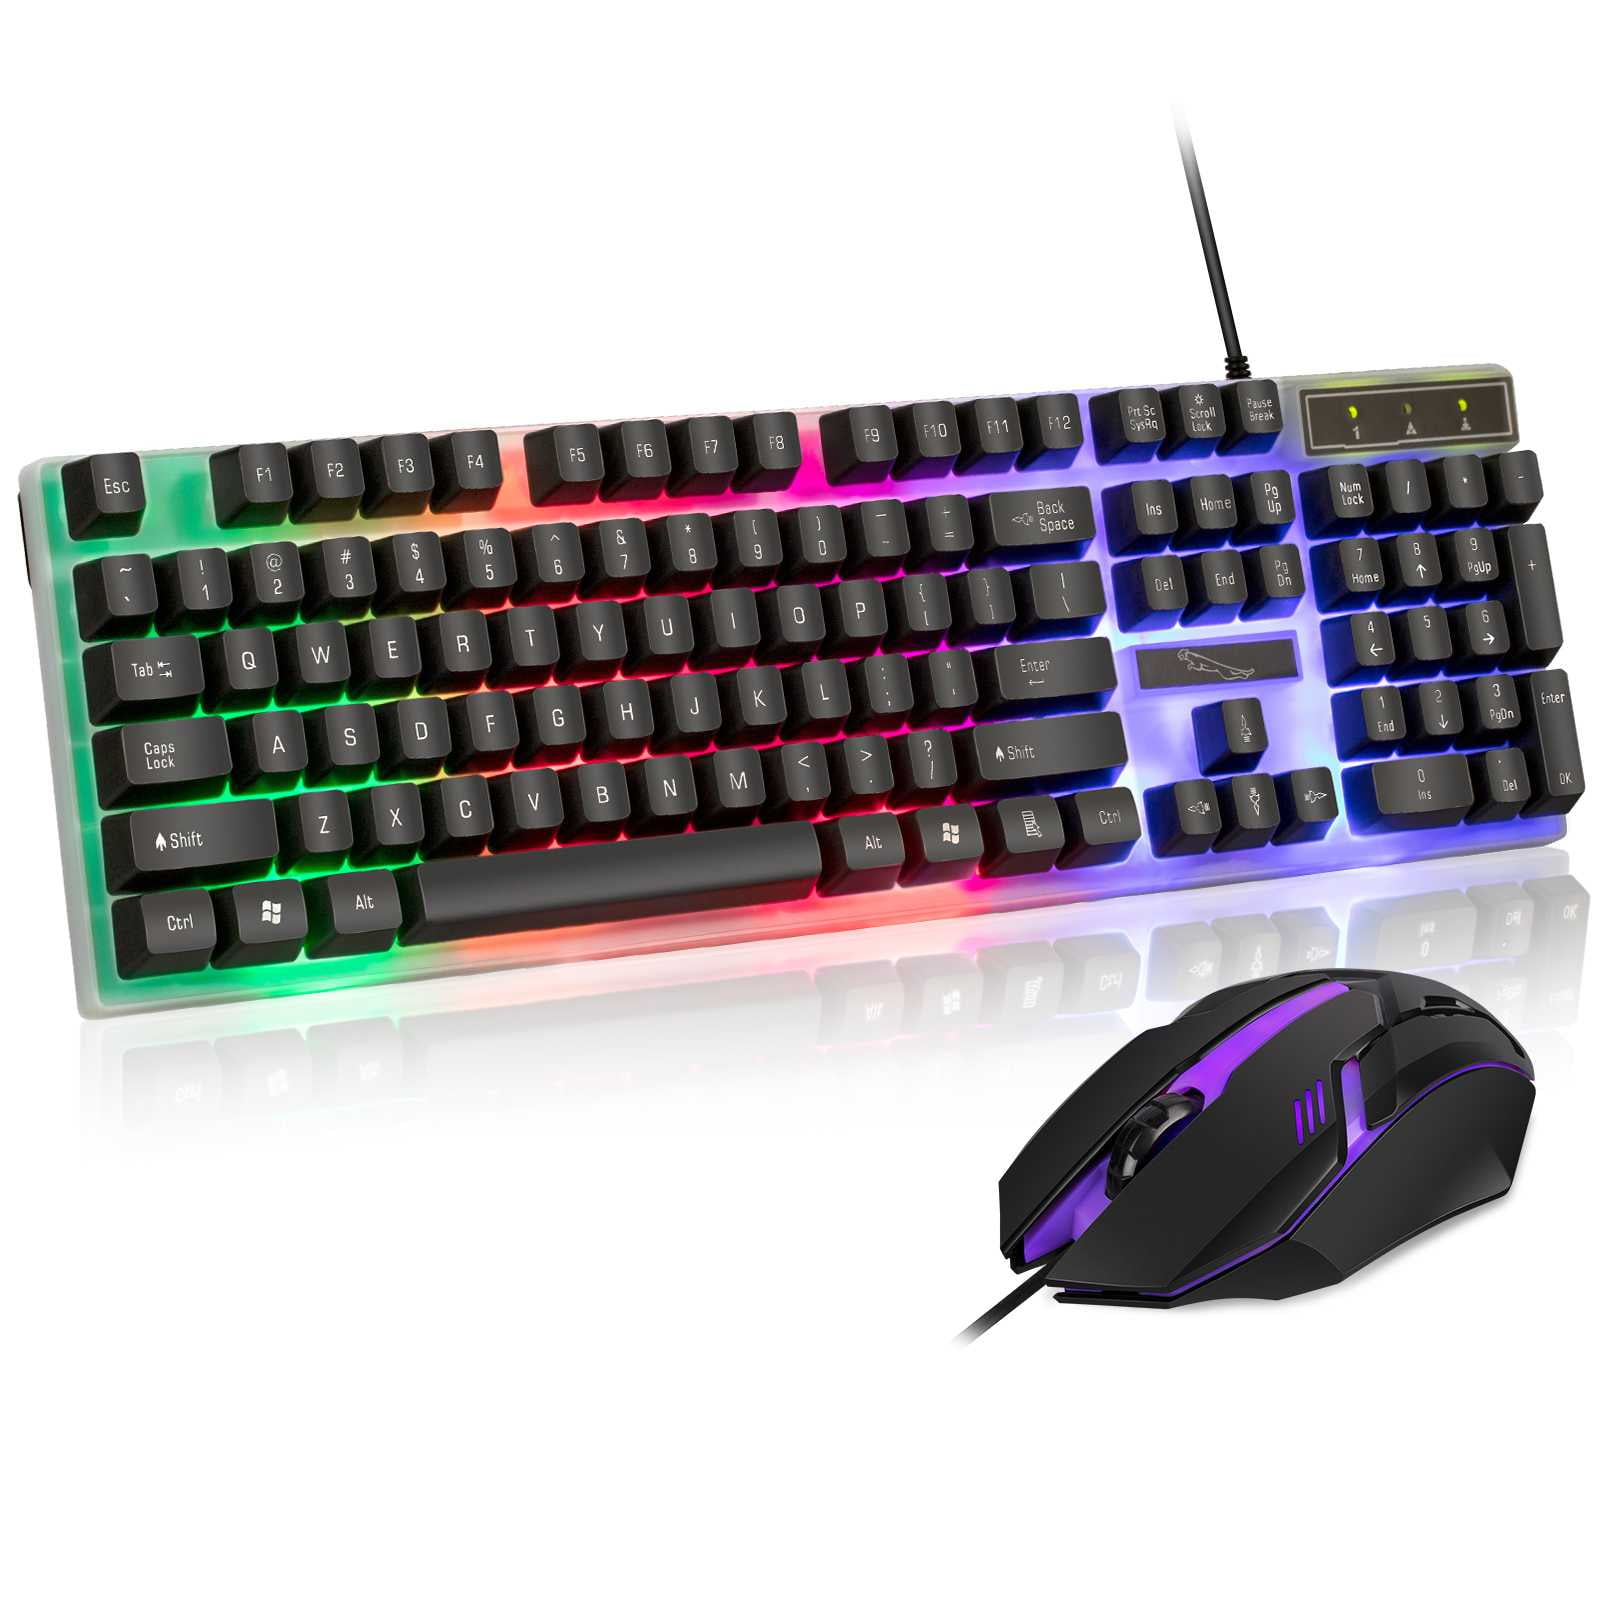 White Games Keyboard & Mouse Combos T6 Rainbow LED Backlight USB Ergonomic Gaming Keyboard and Mouse Set with Mice Pad for PC Laptop 